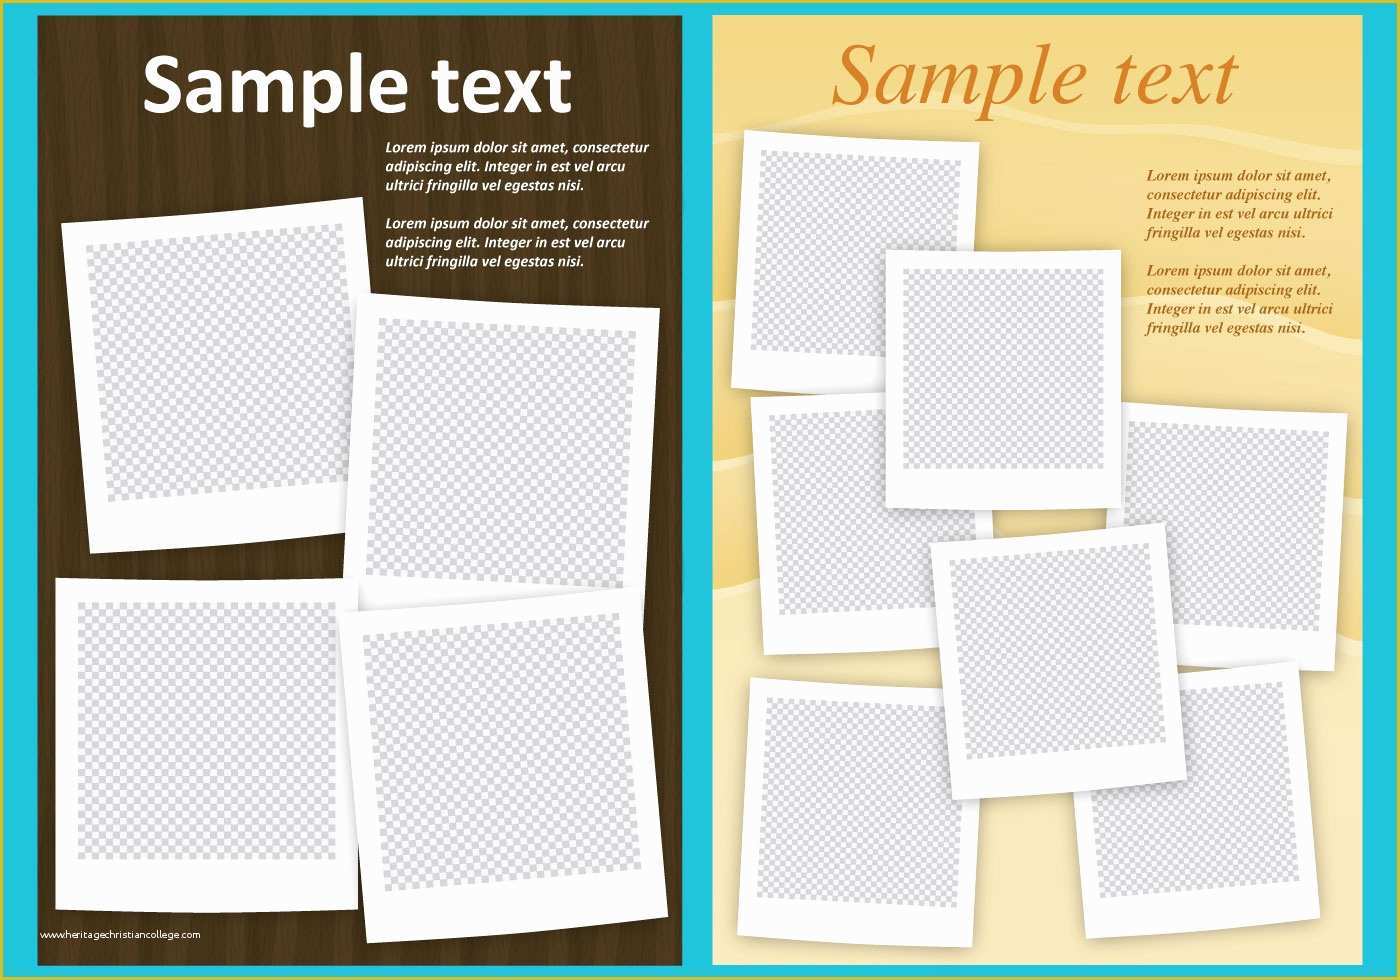 Free Picture Collage Template Of Collage Templates Download Free Vector Art Stock